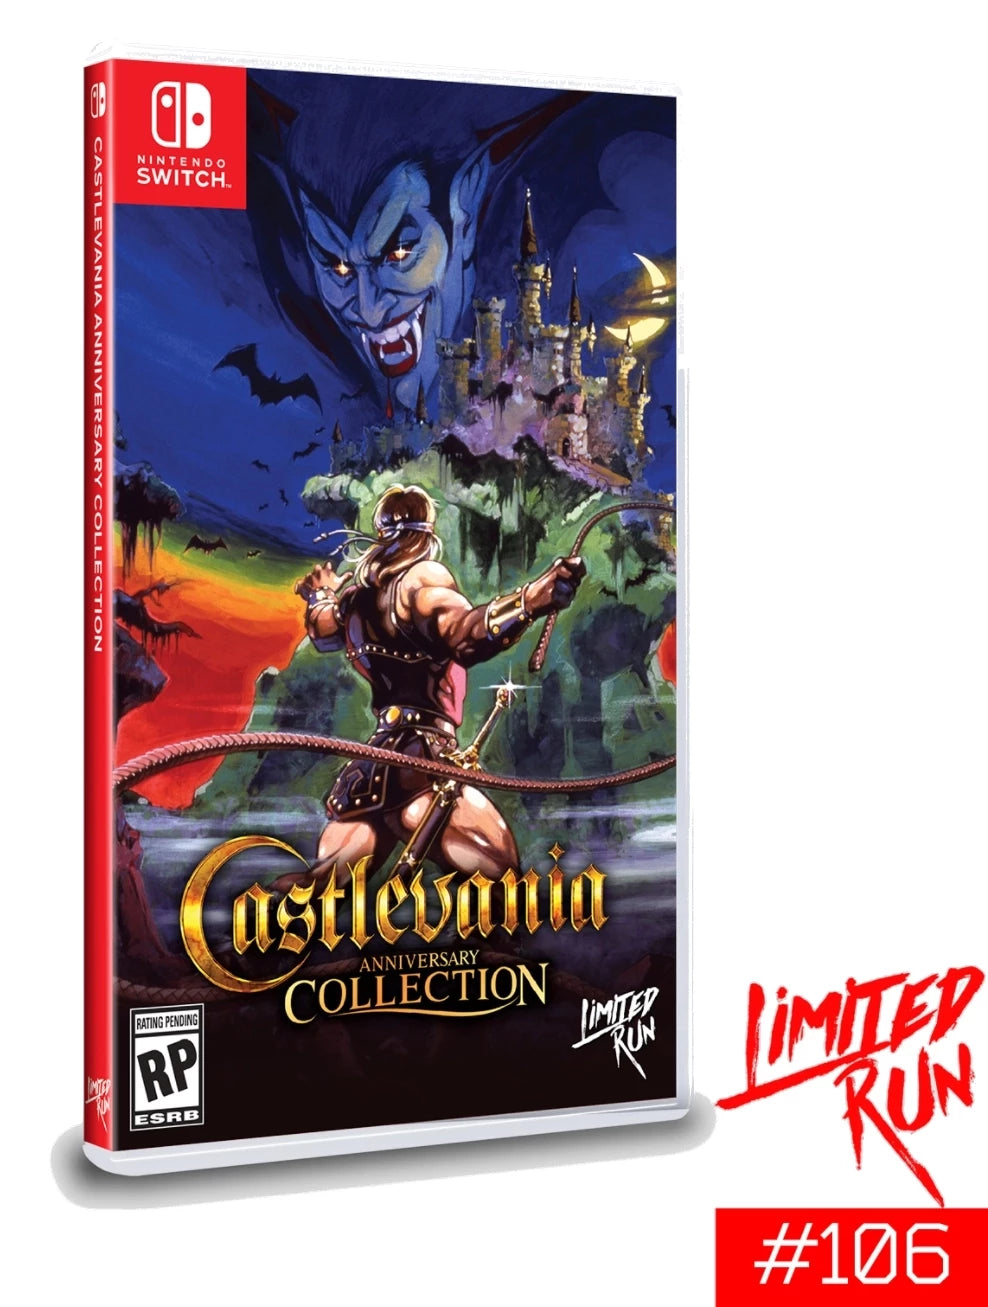 Castlevania anniversary collection (limited run games)